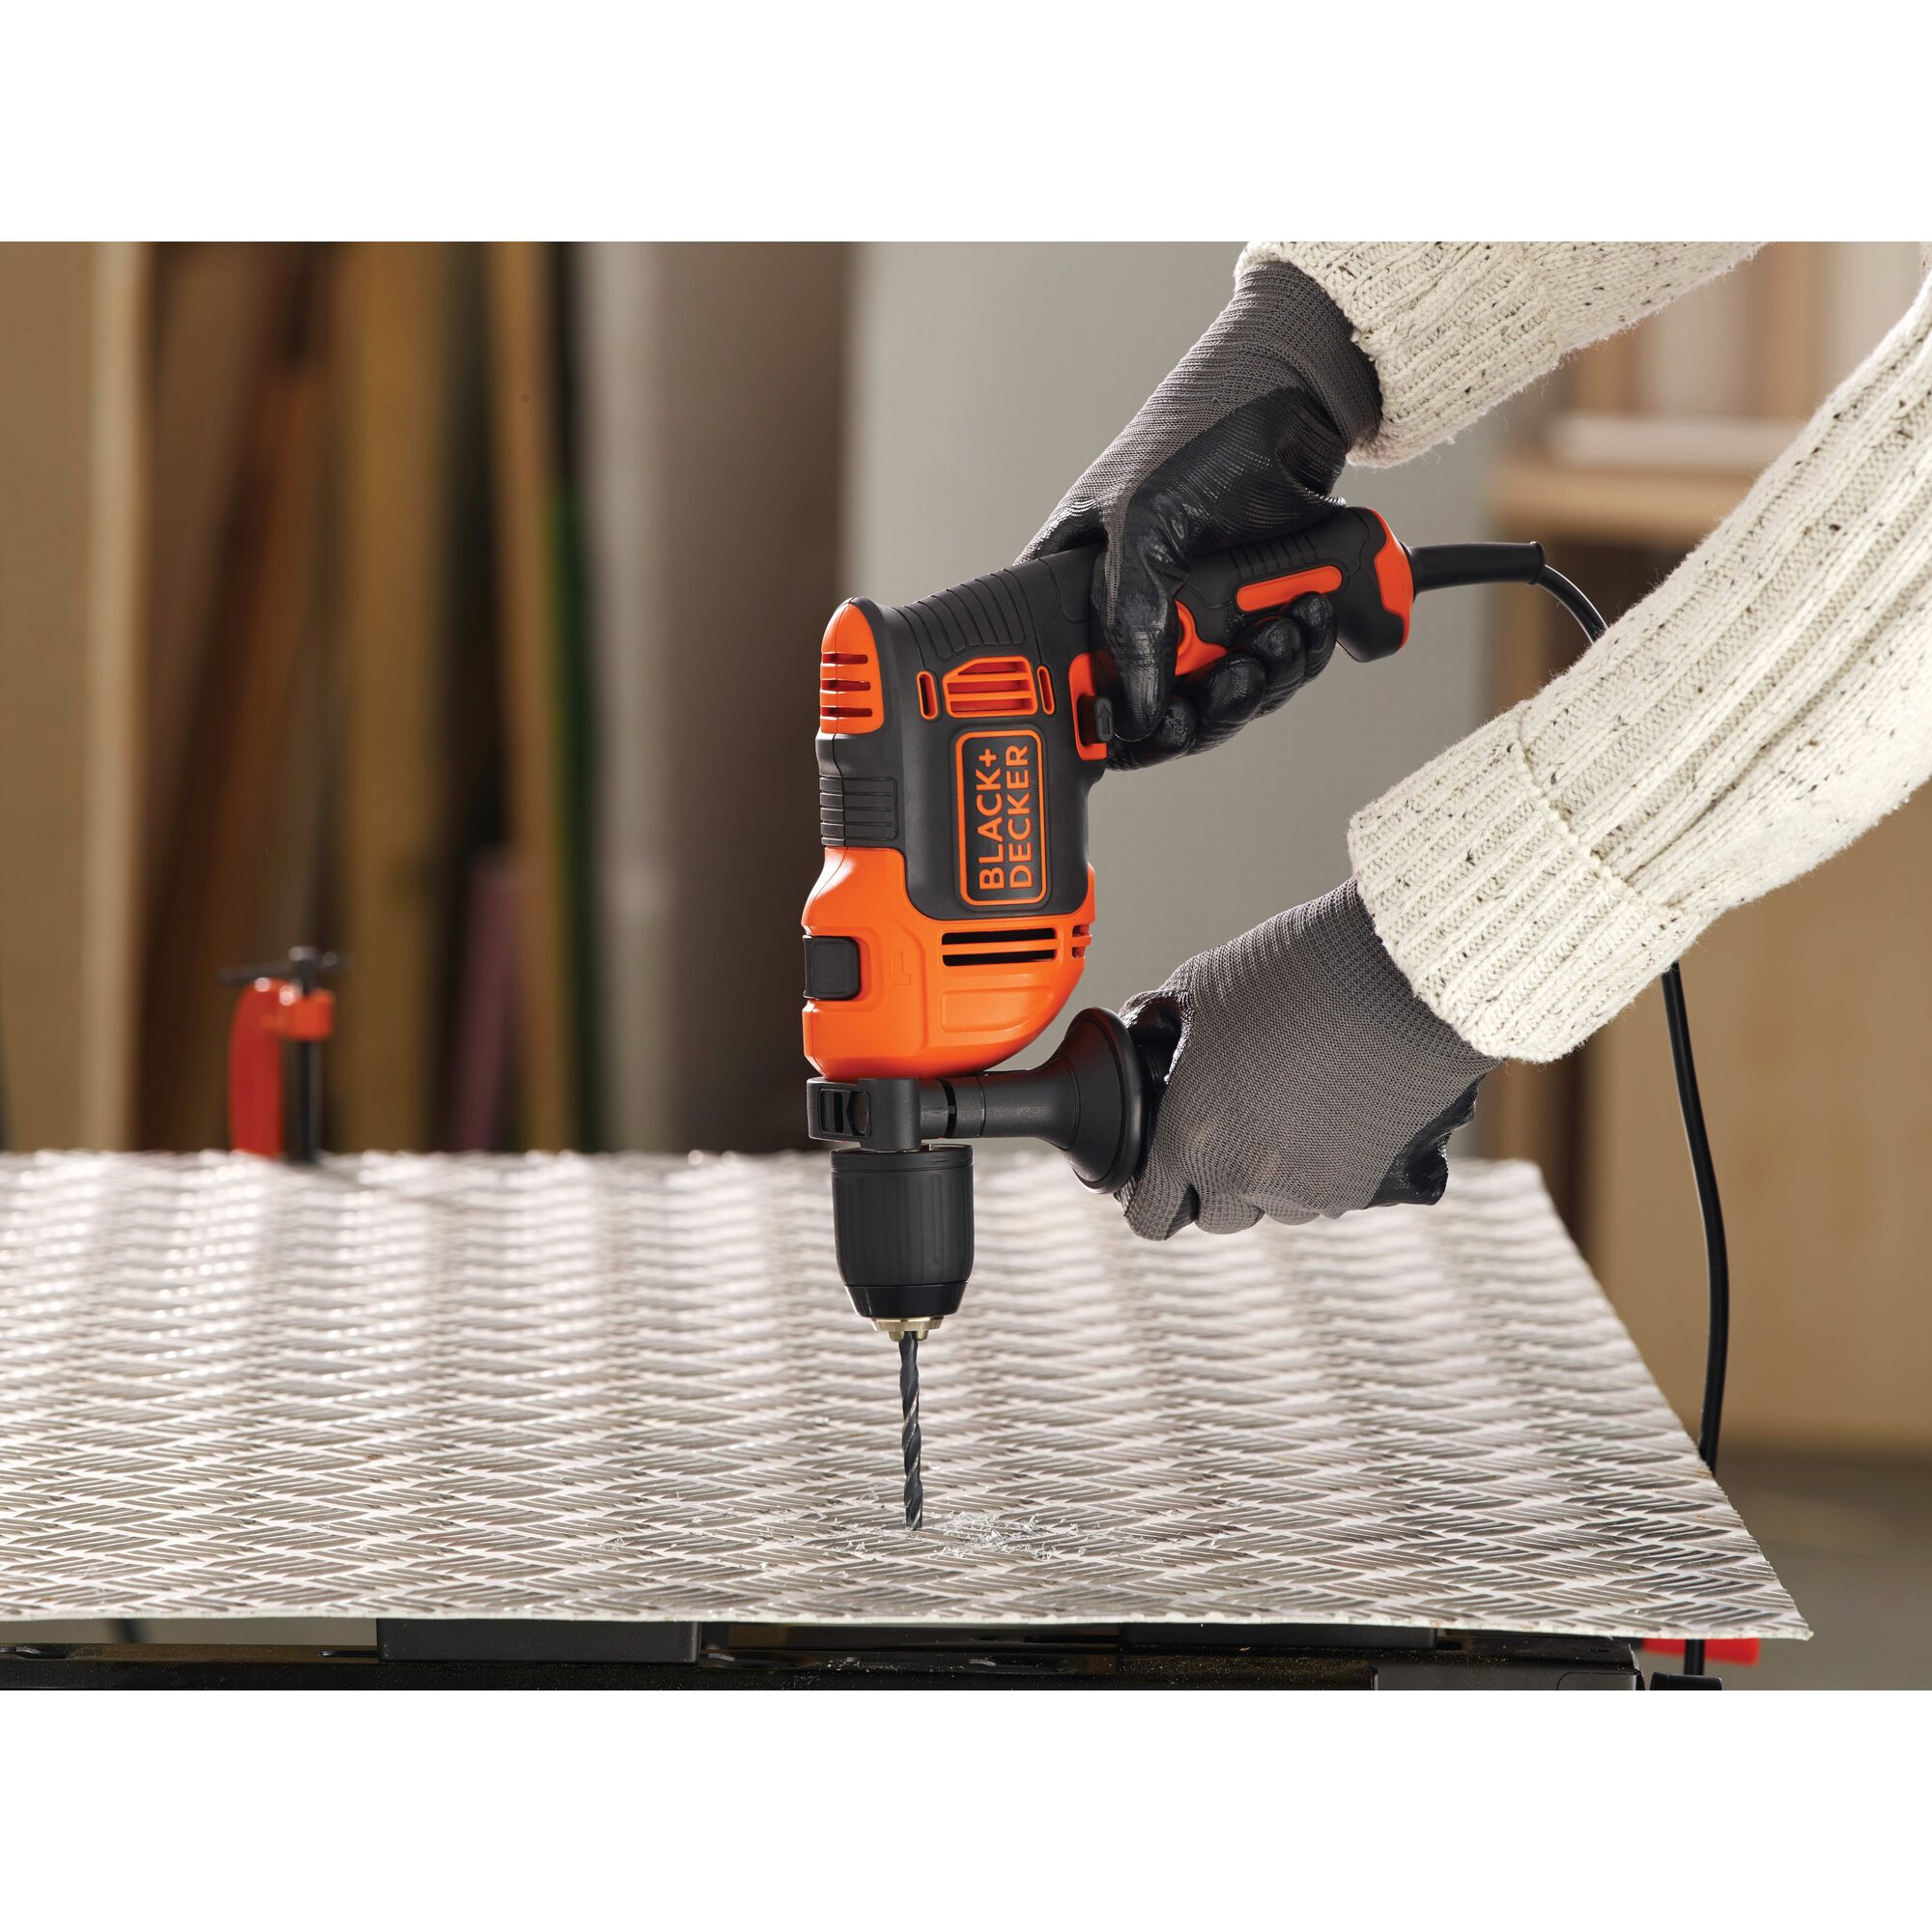 6.5 Amp half inch Hammer Drill being used for drilling.